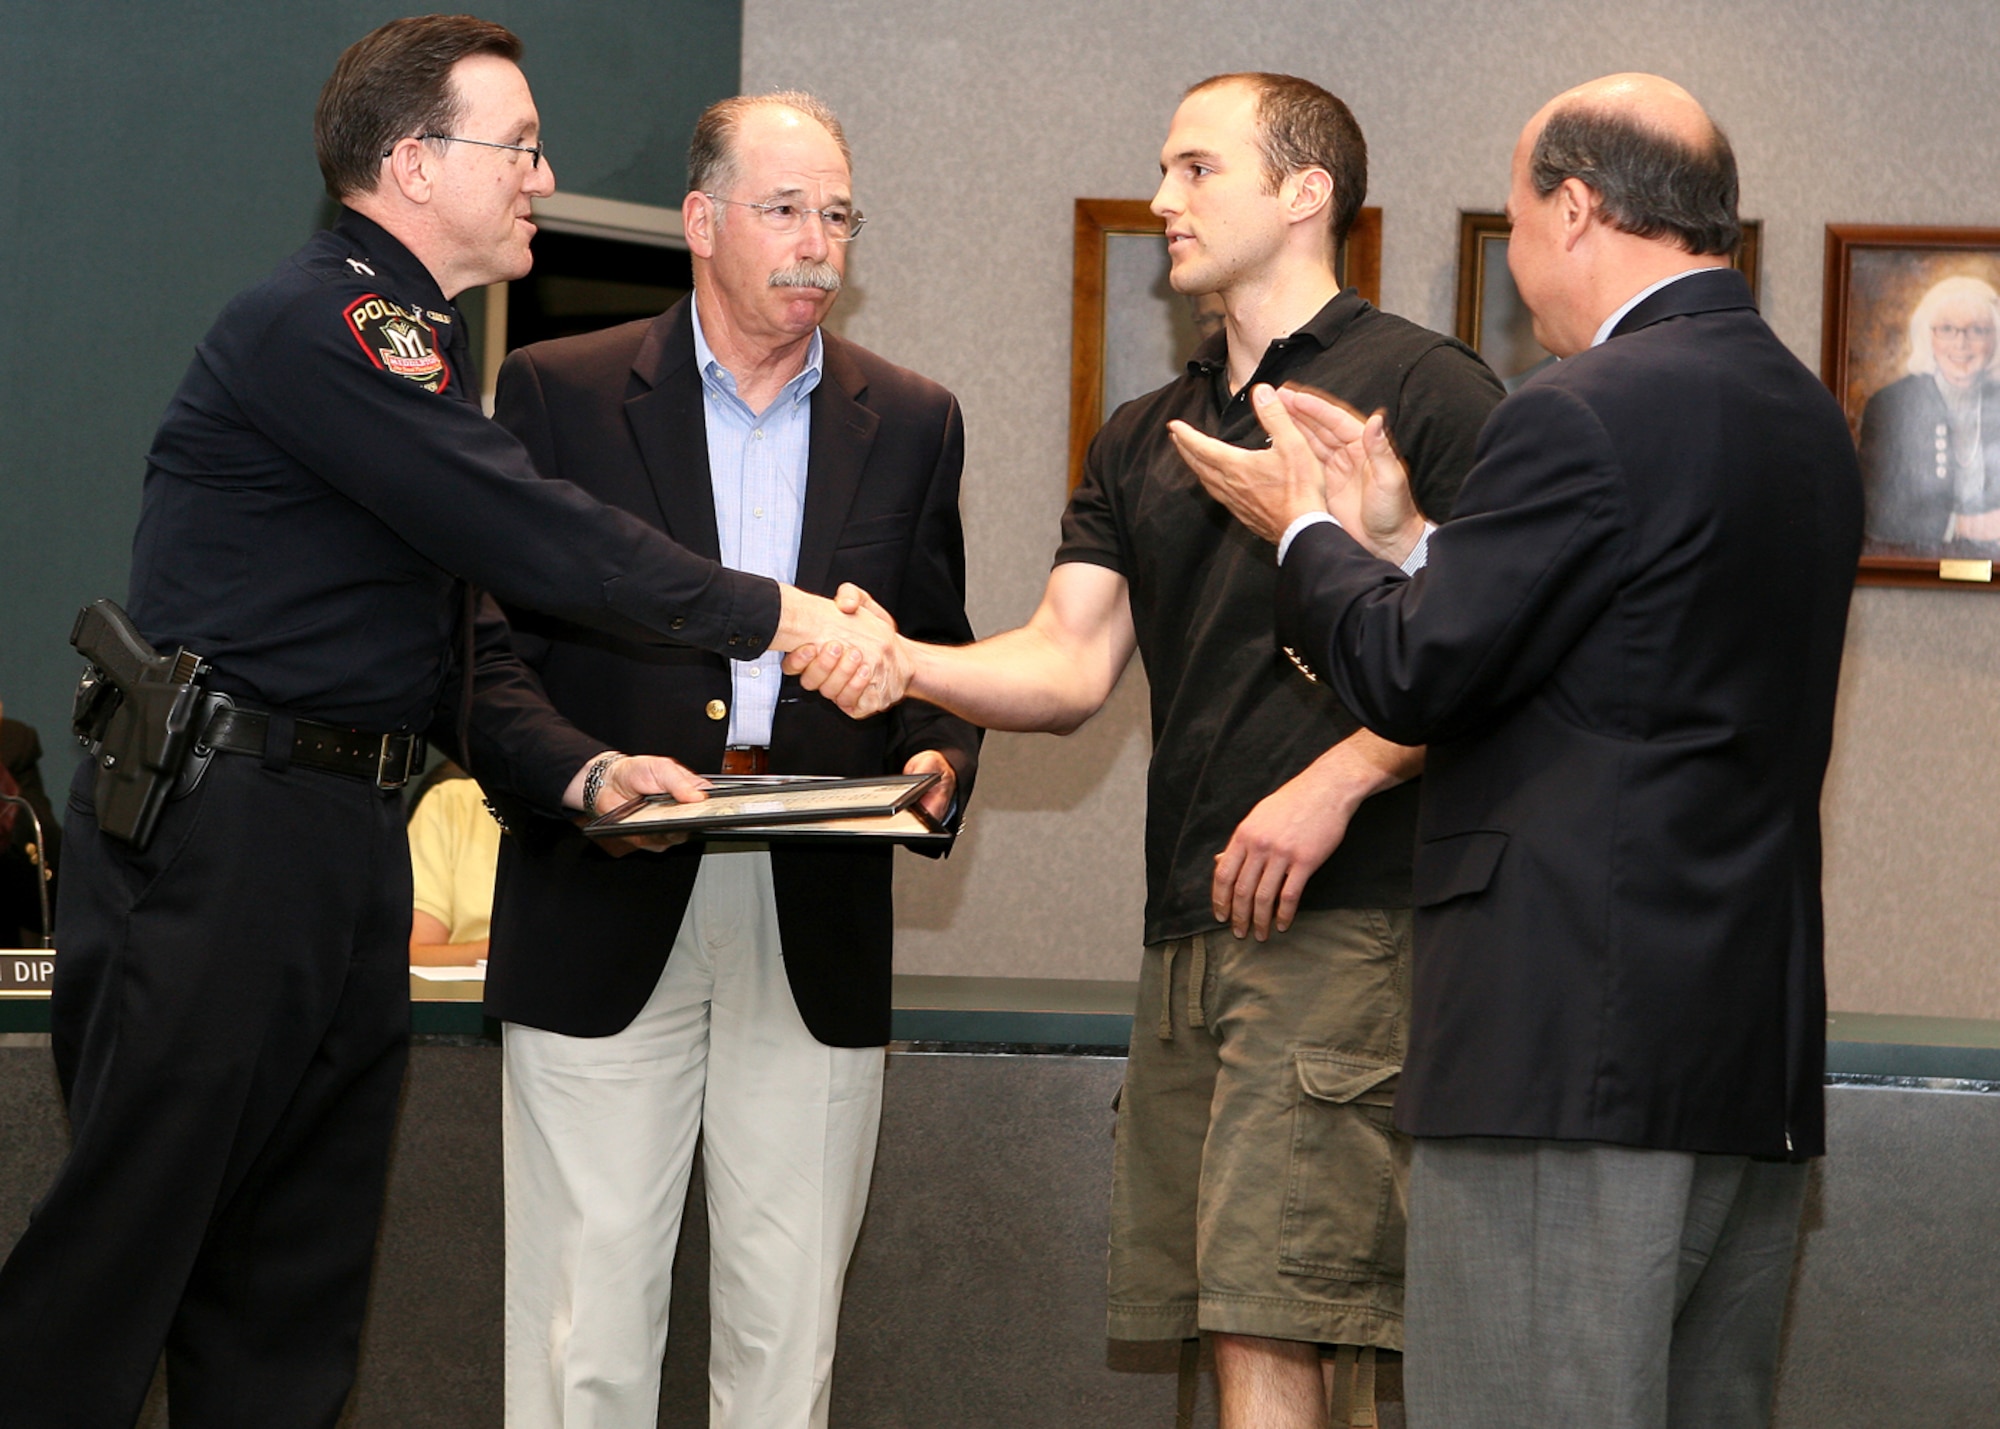 (Left to right) Brad Keil, Middleton Police Chief, Dr. Peter Karofsky, Staff Sgt. Tyson Hall, 115th Contracting Squadron, and Middleton Mayor Kurt Sonnentag stand together following a recognition ceremony for Sergeant Hall for his lifesaving rescue April 18 at Middleton High School. (Photo: Courtesy)